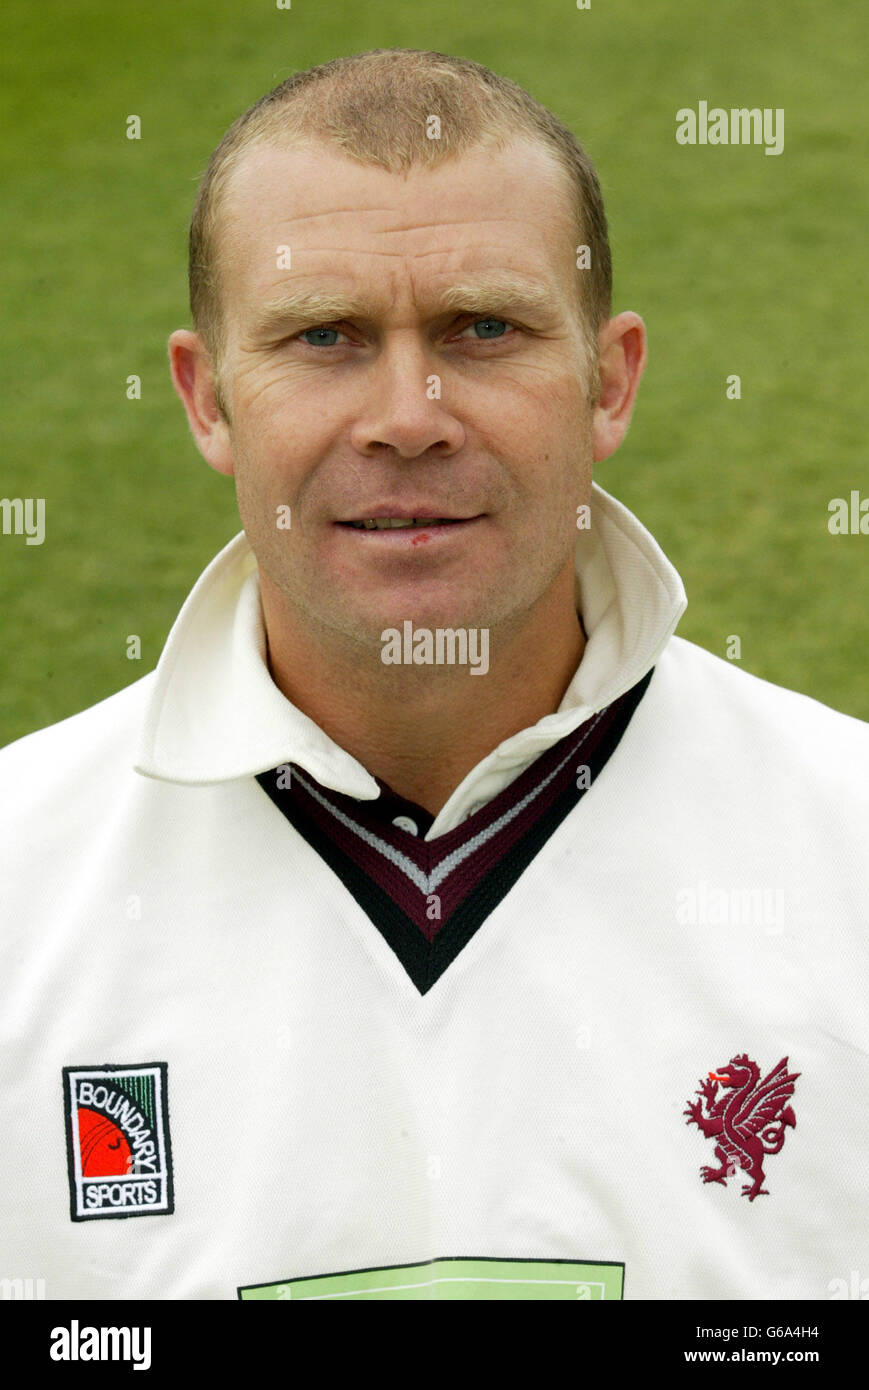 Somerset County Cricket - Mike Burns. Mike Burns - Somerset County Ground, Taunton. Stock Photo